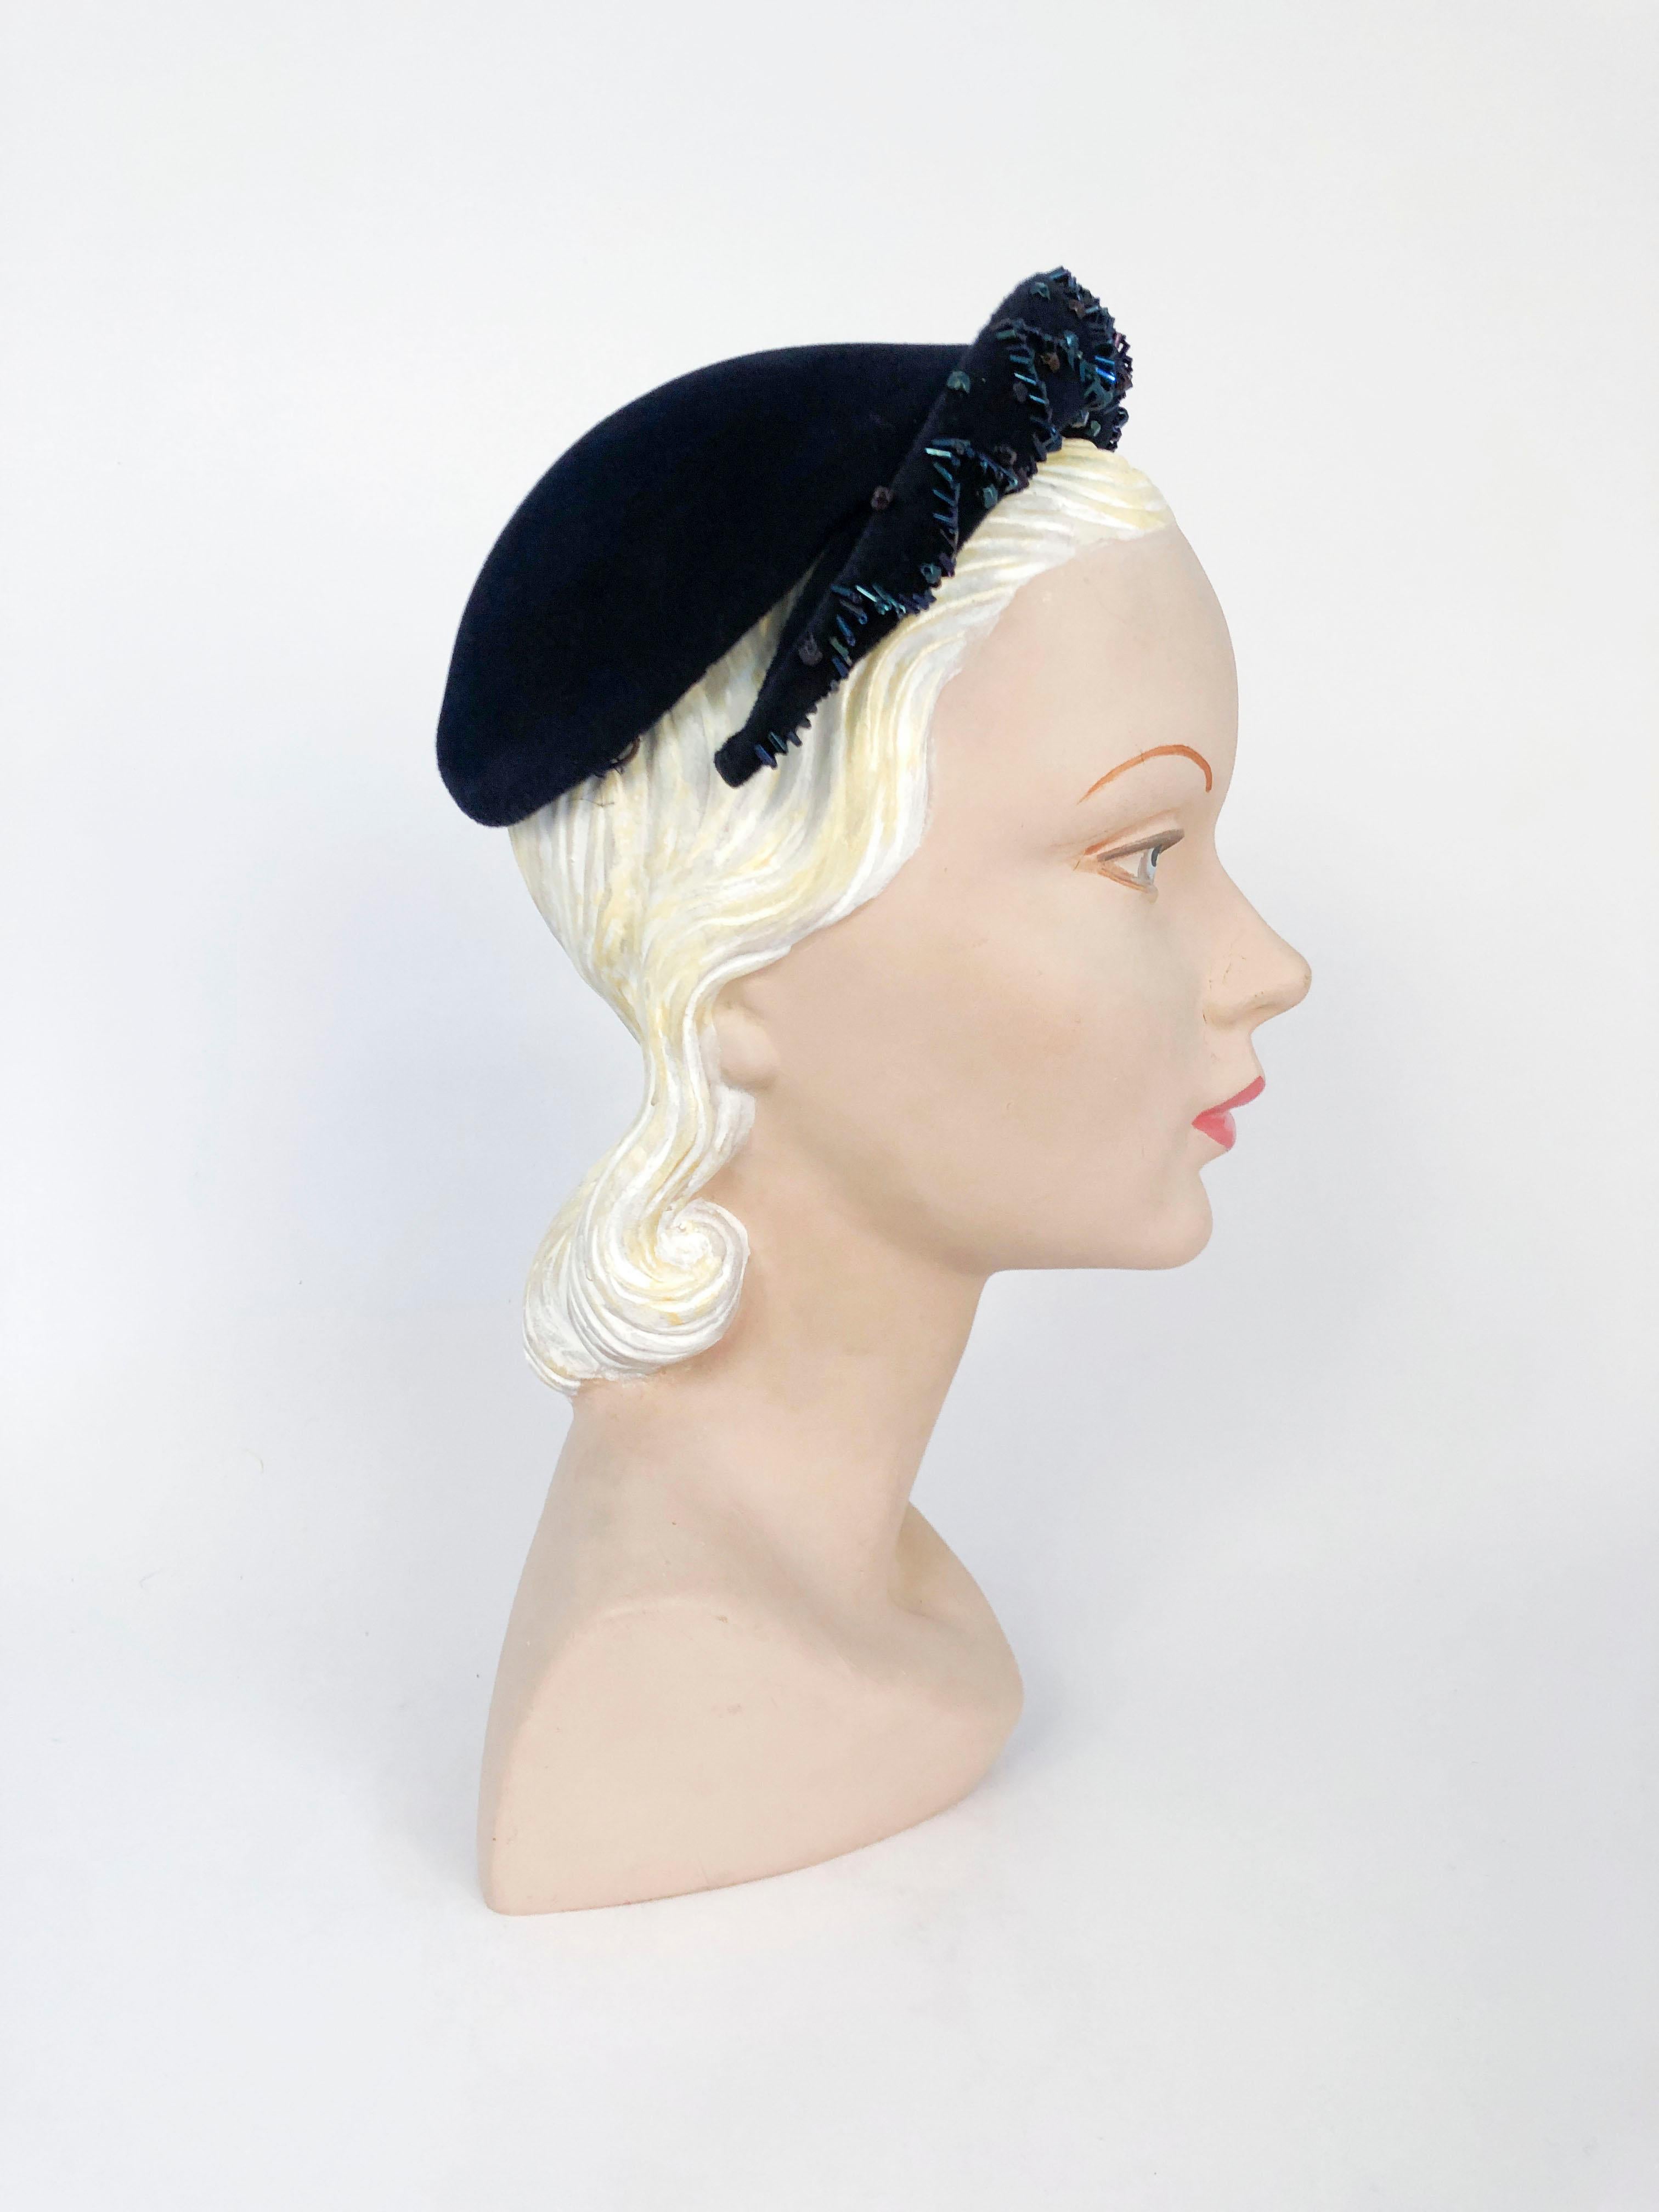 Women's 1950's Navy Blue Cashmere Felt Hat with Hand Beading Decoration